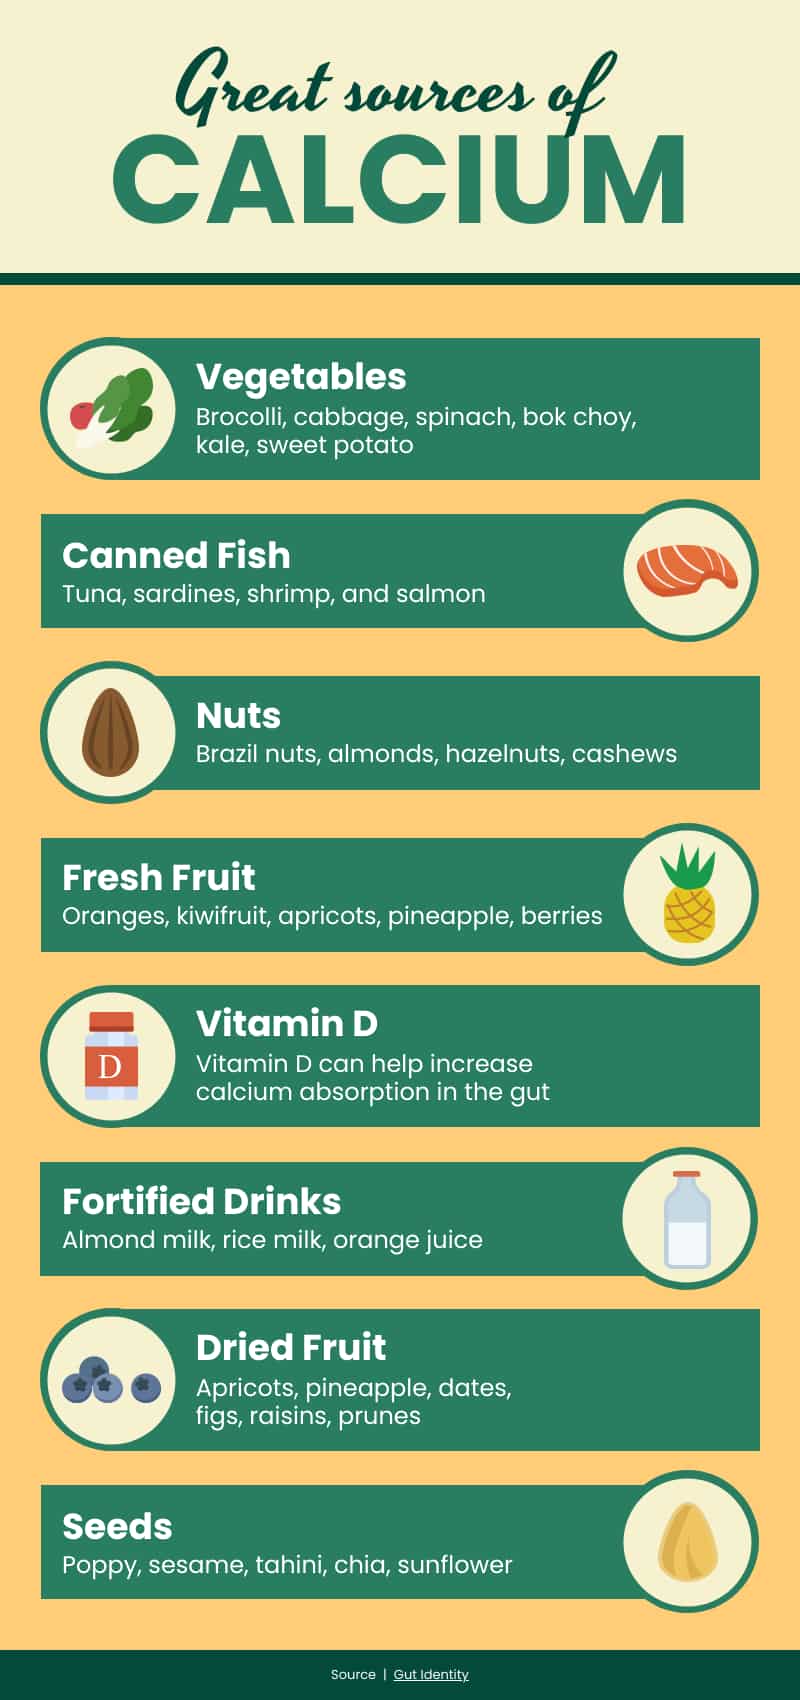 template for great sources of calcium infographic